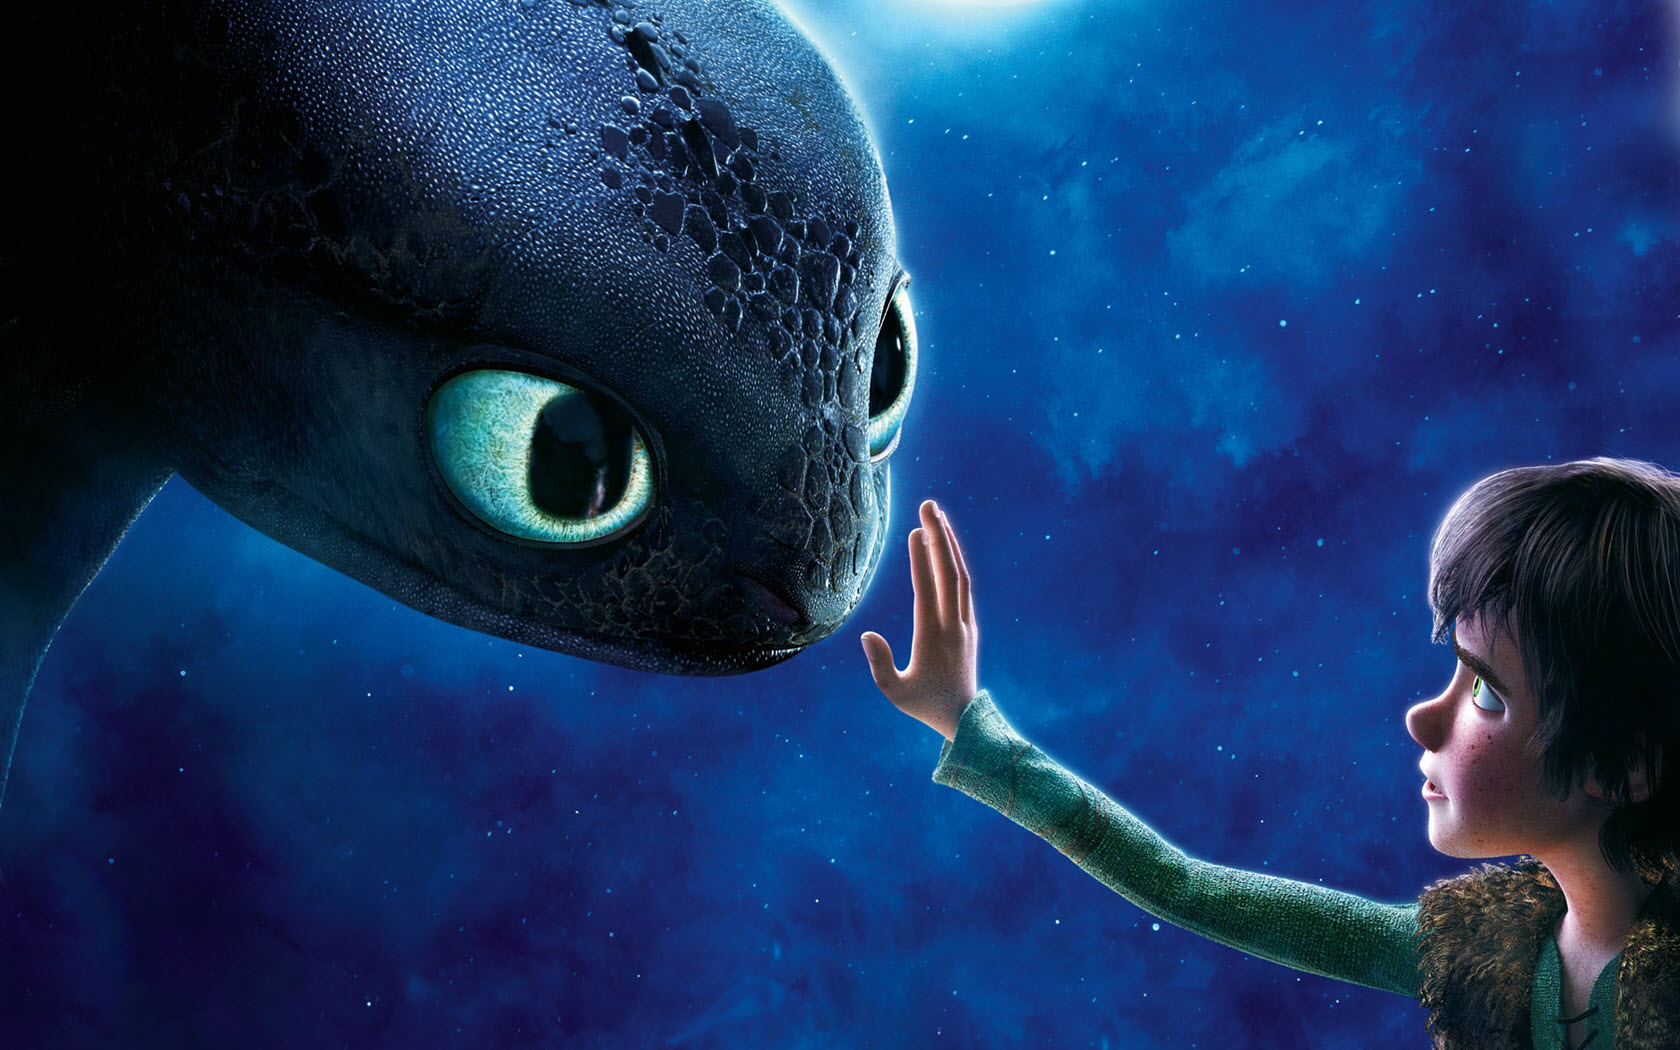 How To Train Your Dragon 2 nabs a Golden Globe!